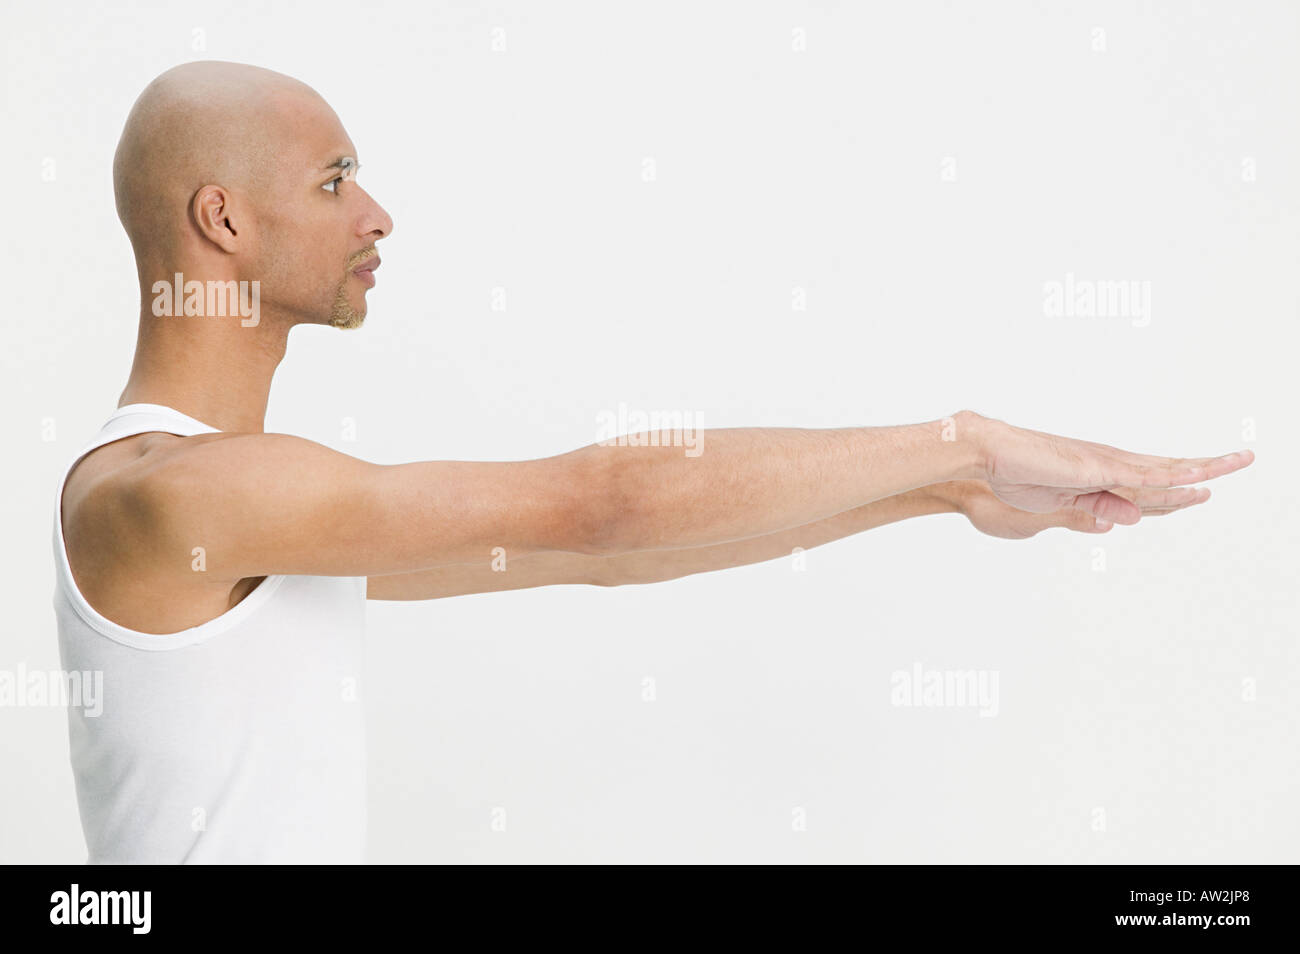 Strong man arms stretched out back Stock Photo by ©alanpoulson